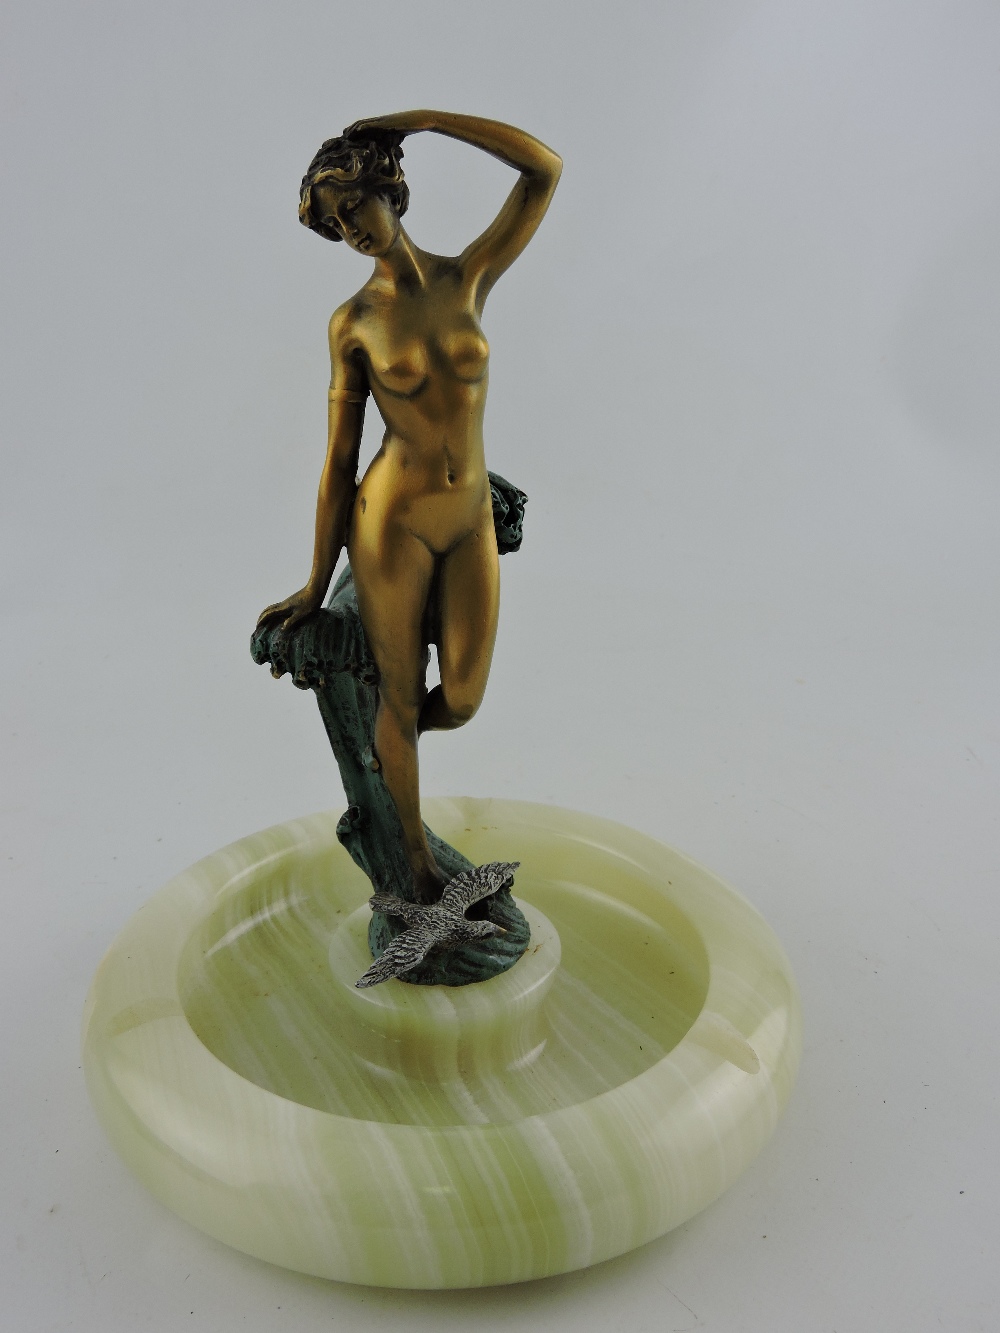 A bronze Art Nouveau style figure, nude standing with a bird at her feet,